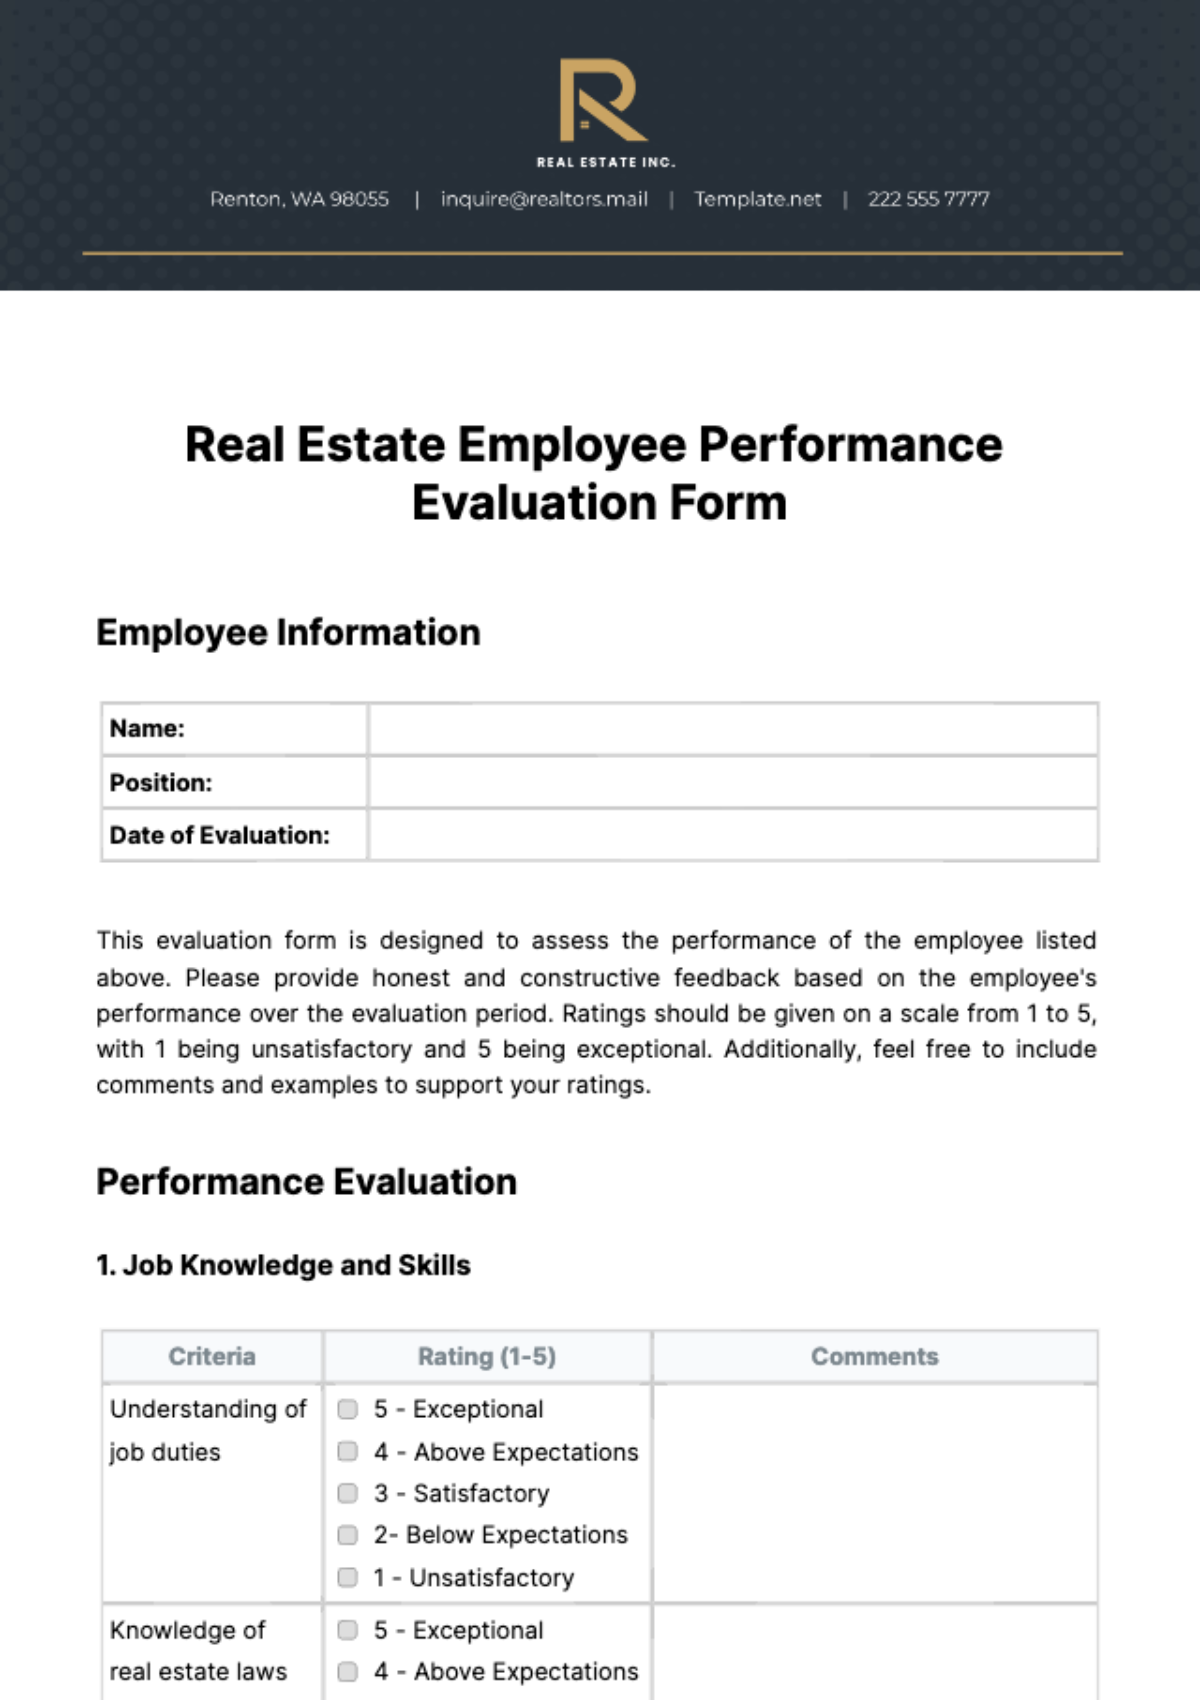 Real Estate Employee Performance Evaluation Form Template